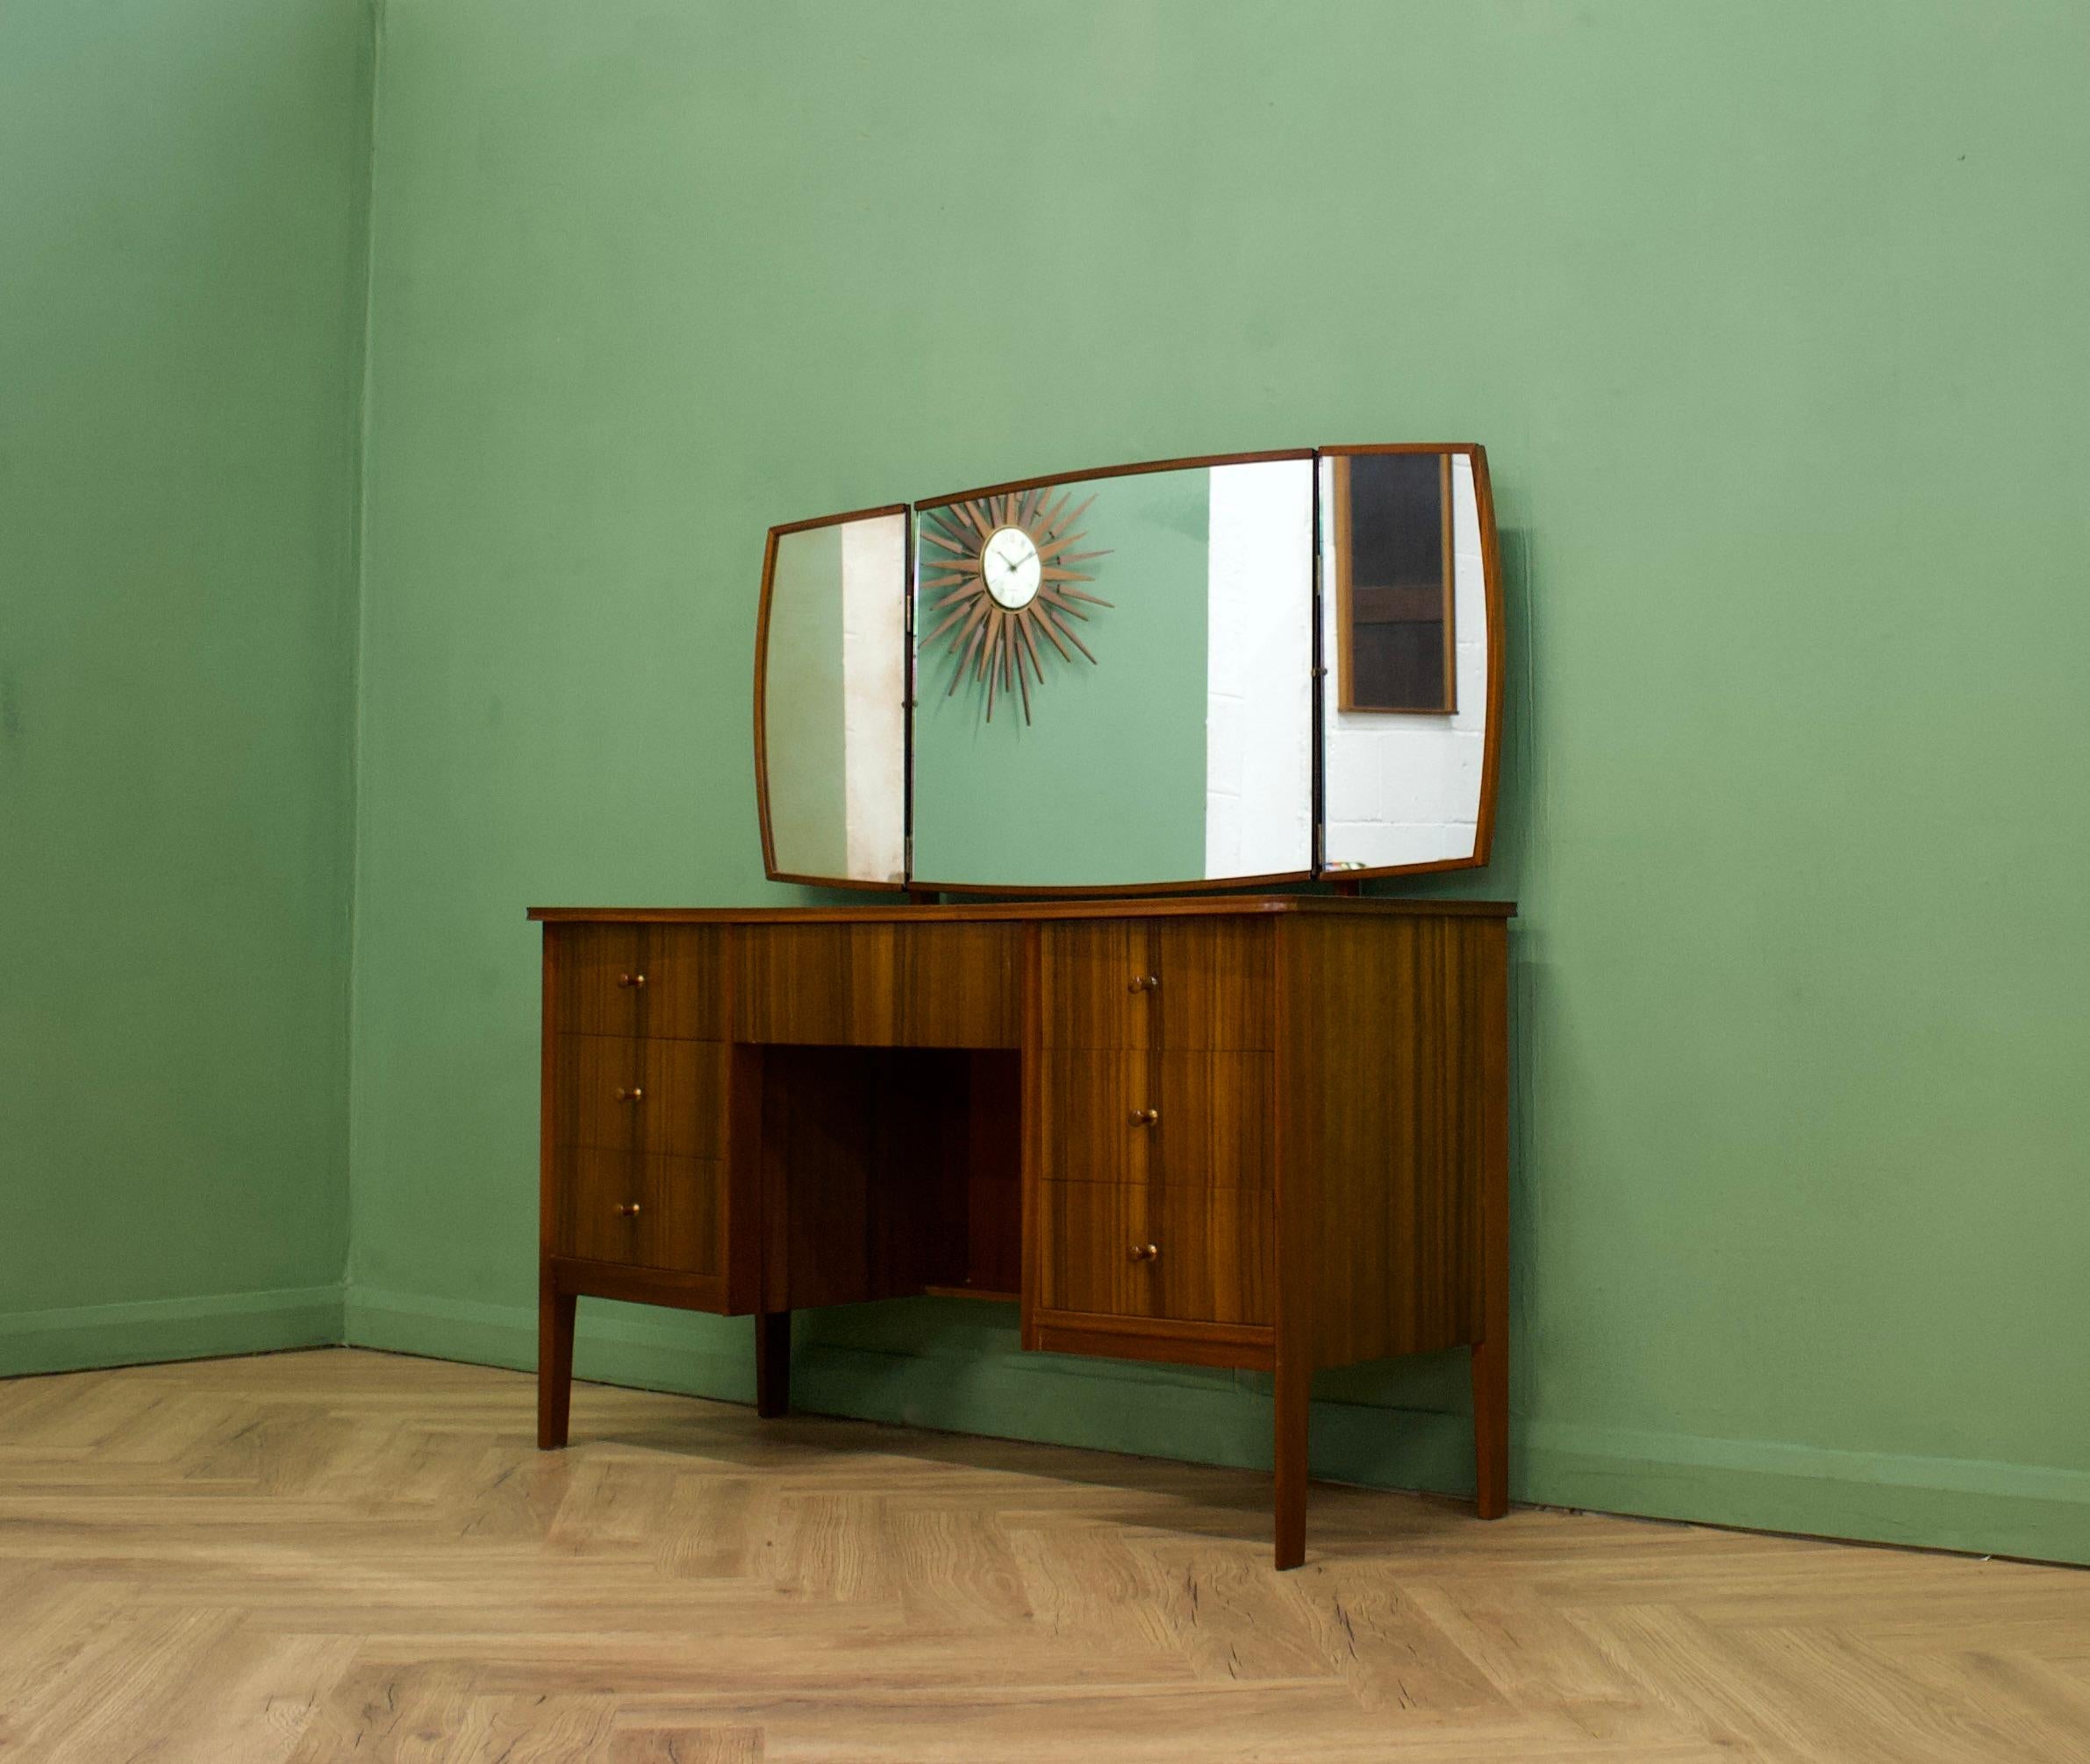 British Mid Century Vintage Dressing Table in Walnut from Vanson, 1960s For Sale